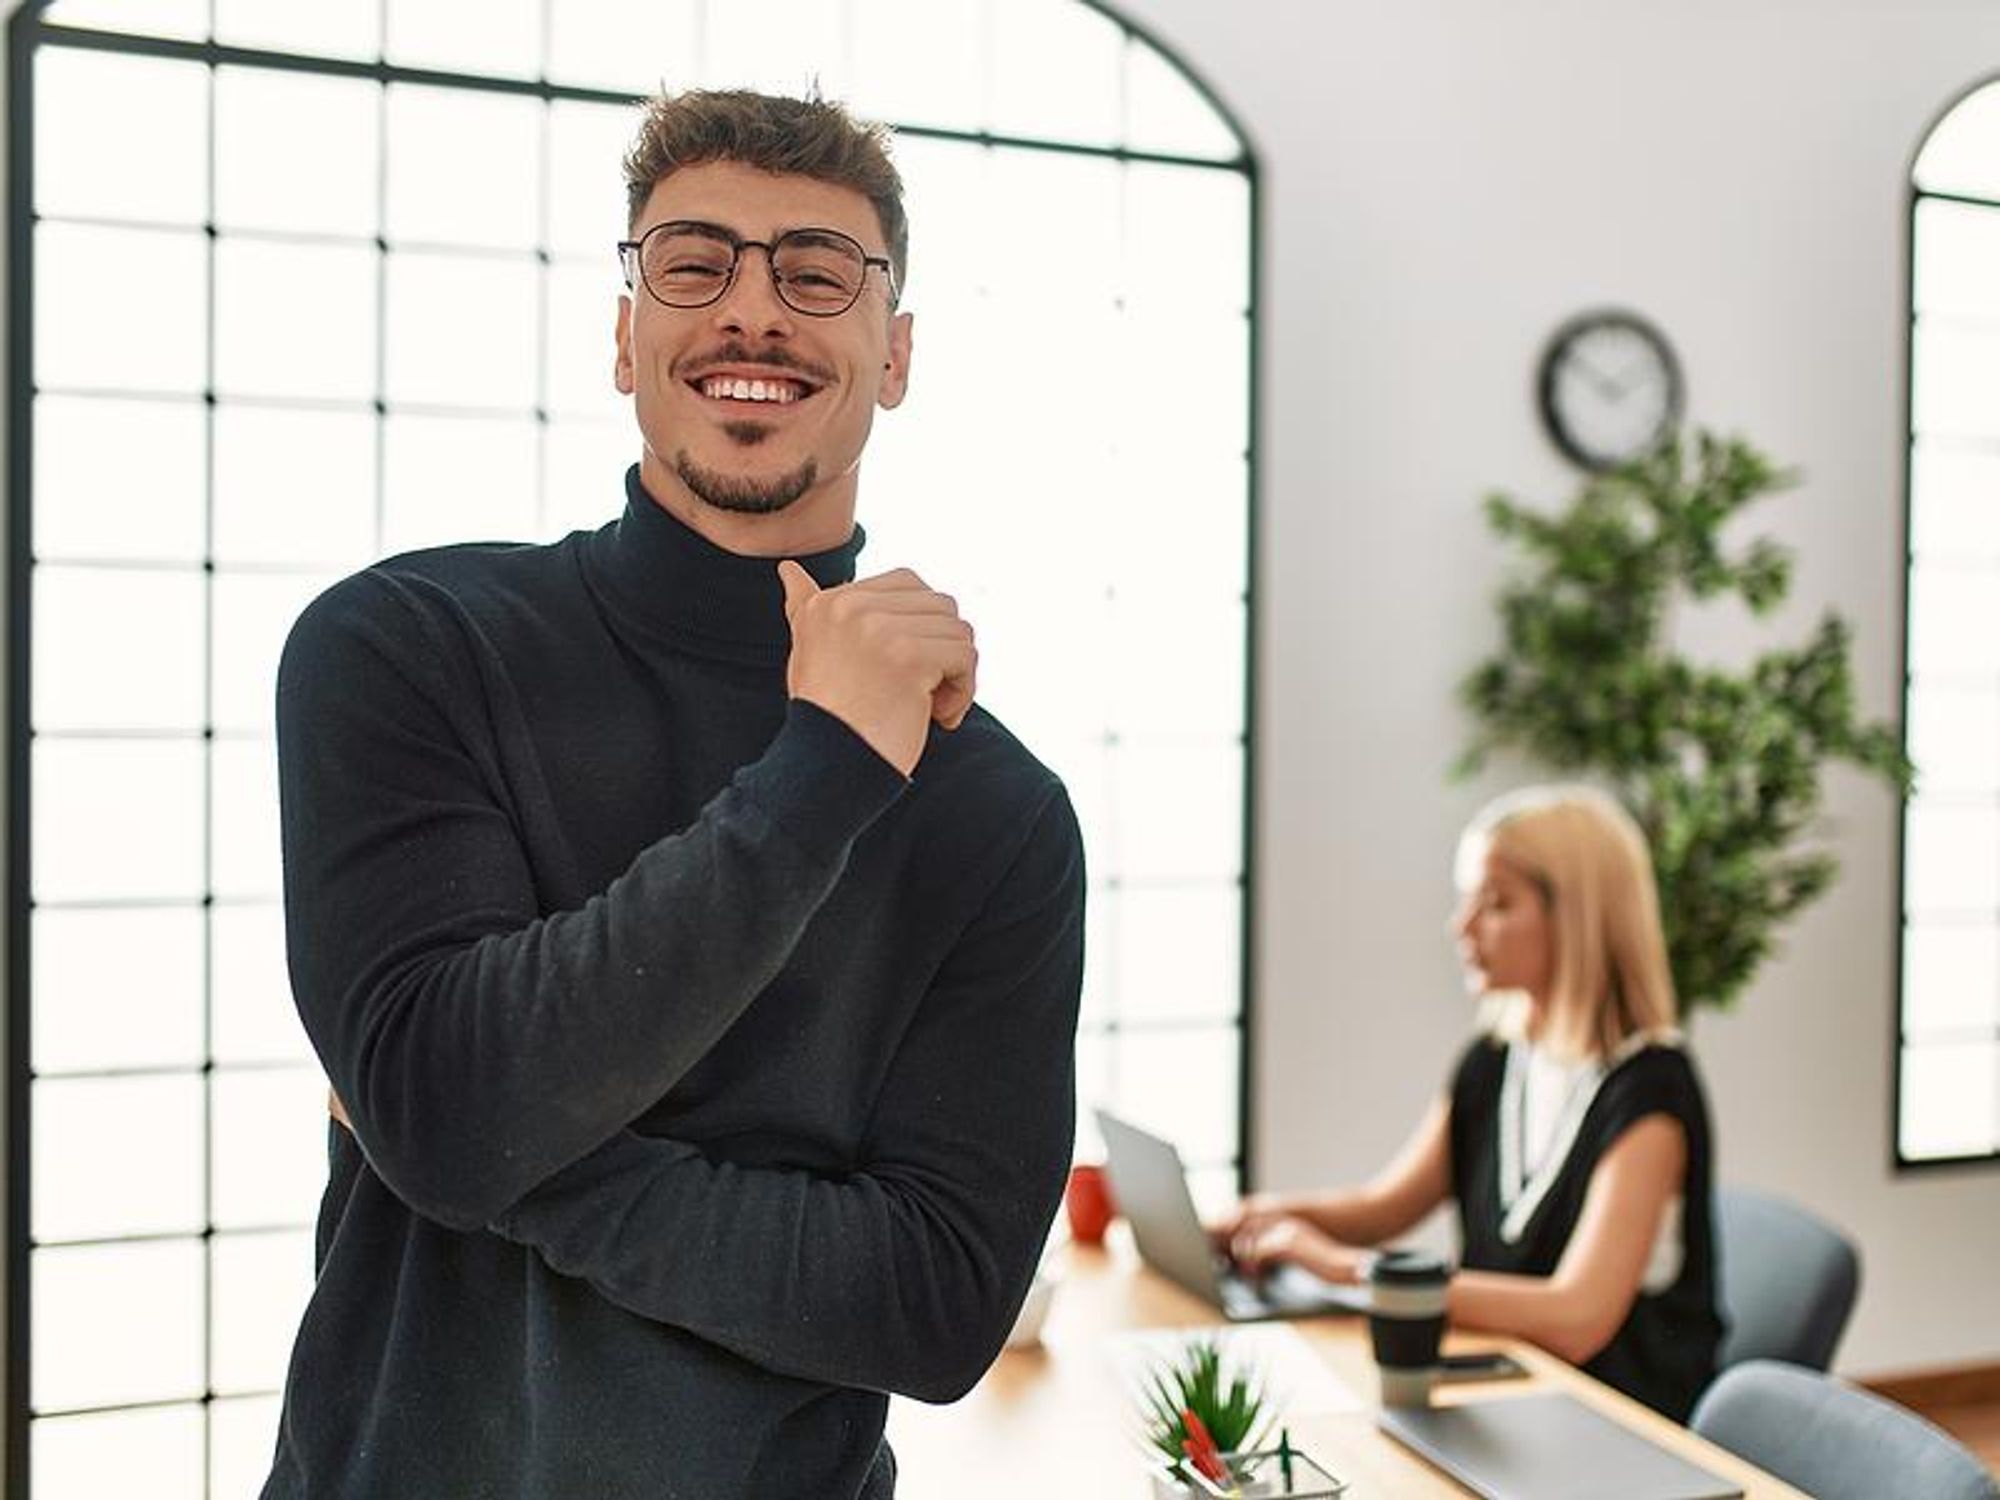 Man happy at work after getting a promotion